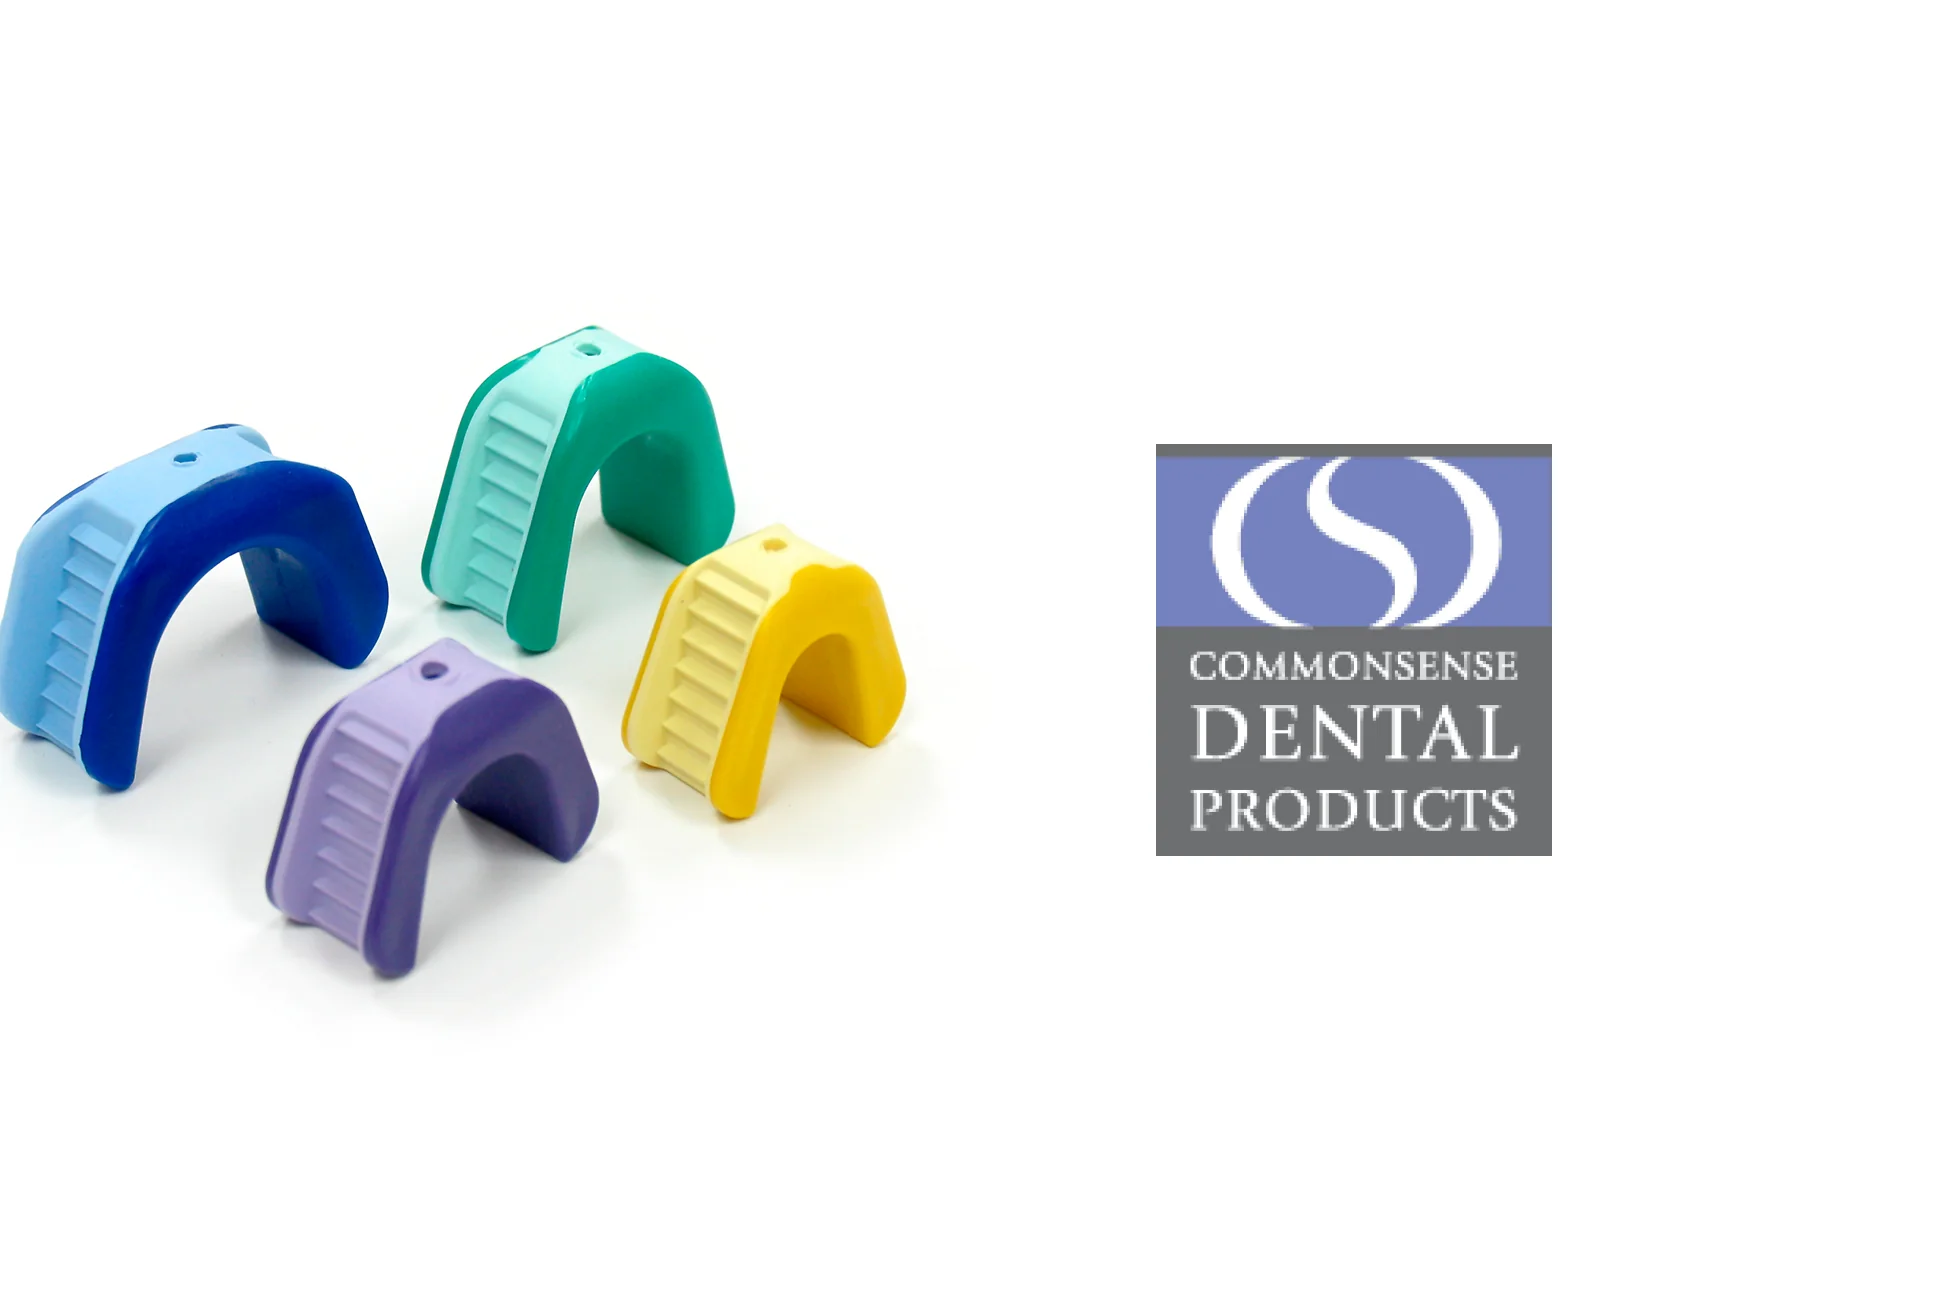 Commonsense Dental Products